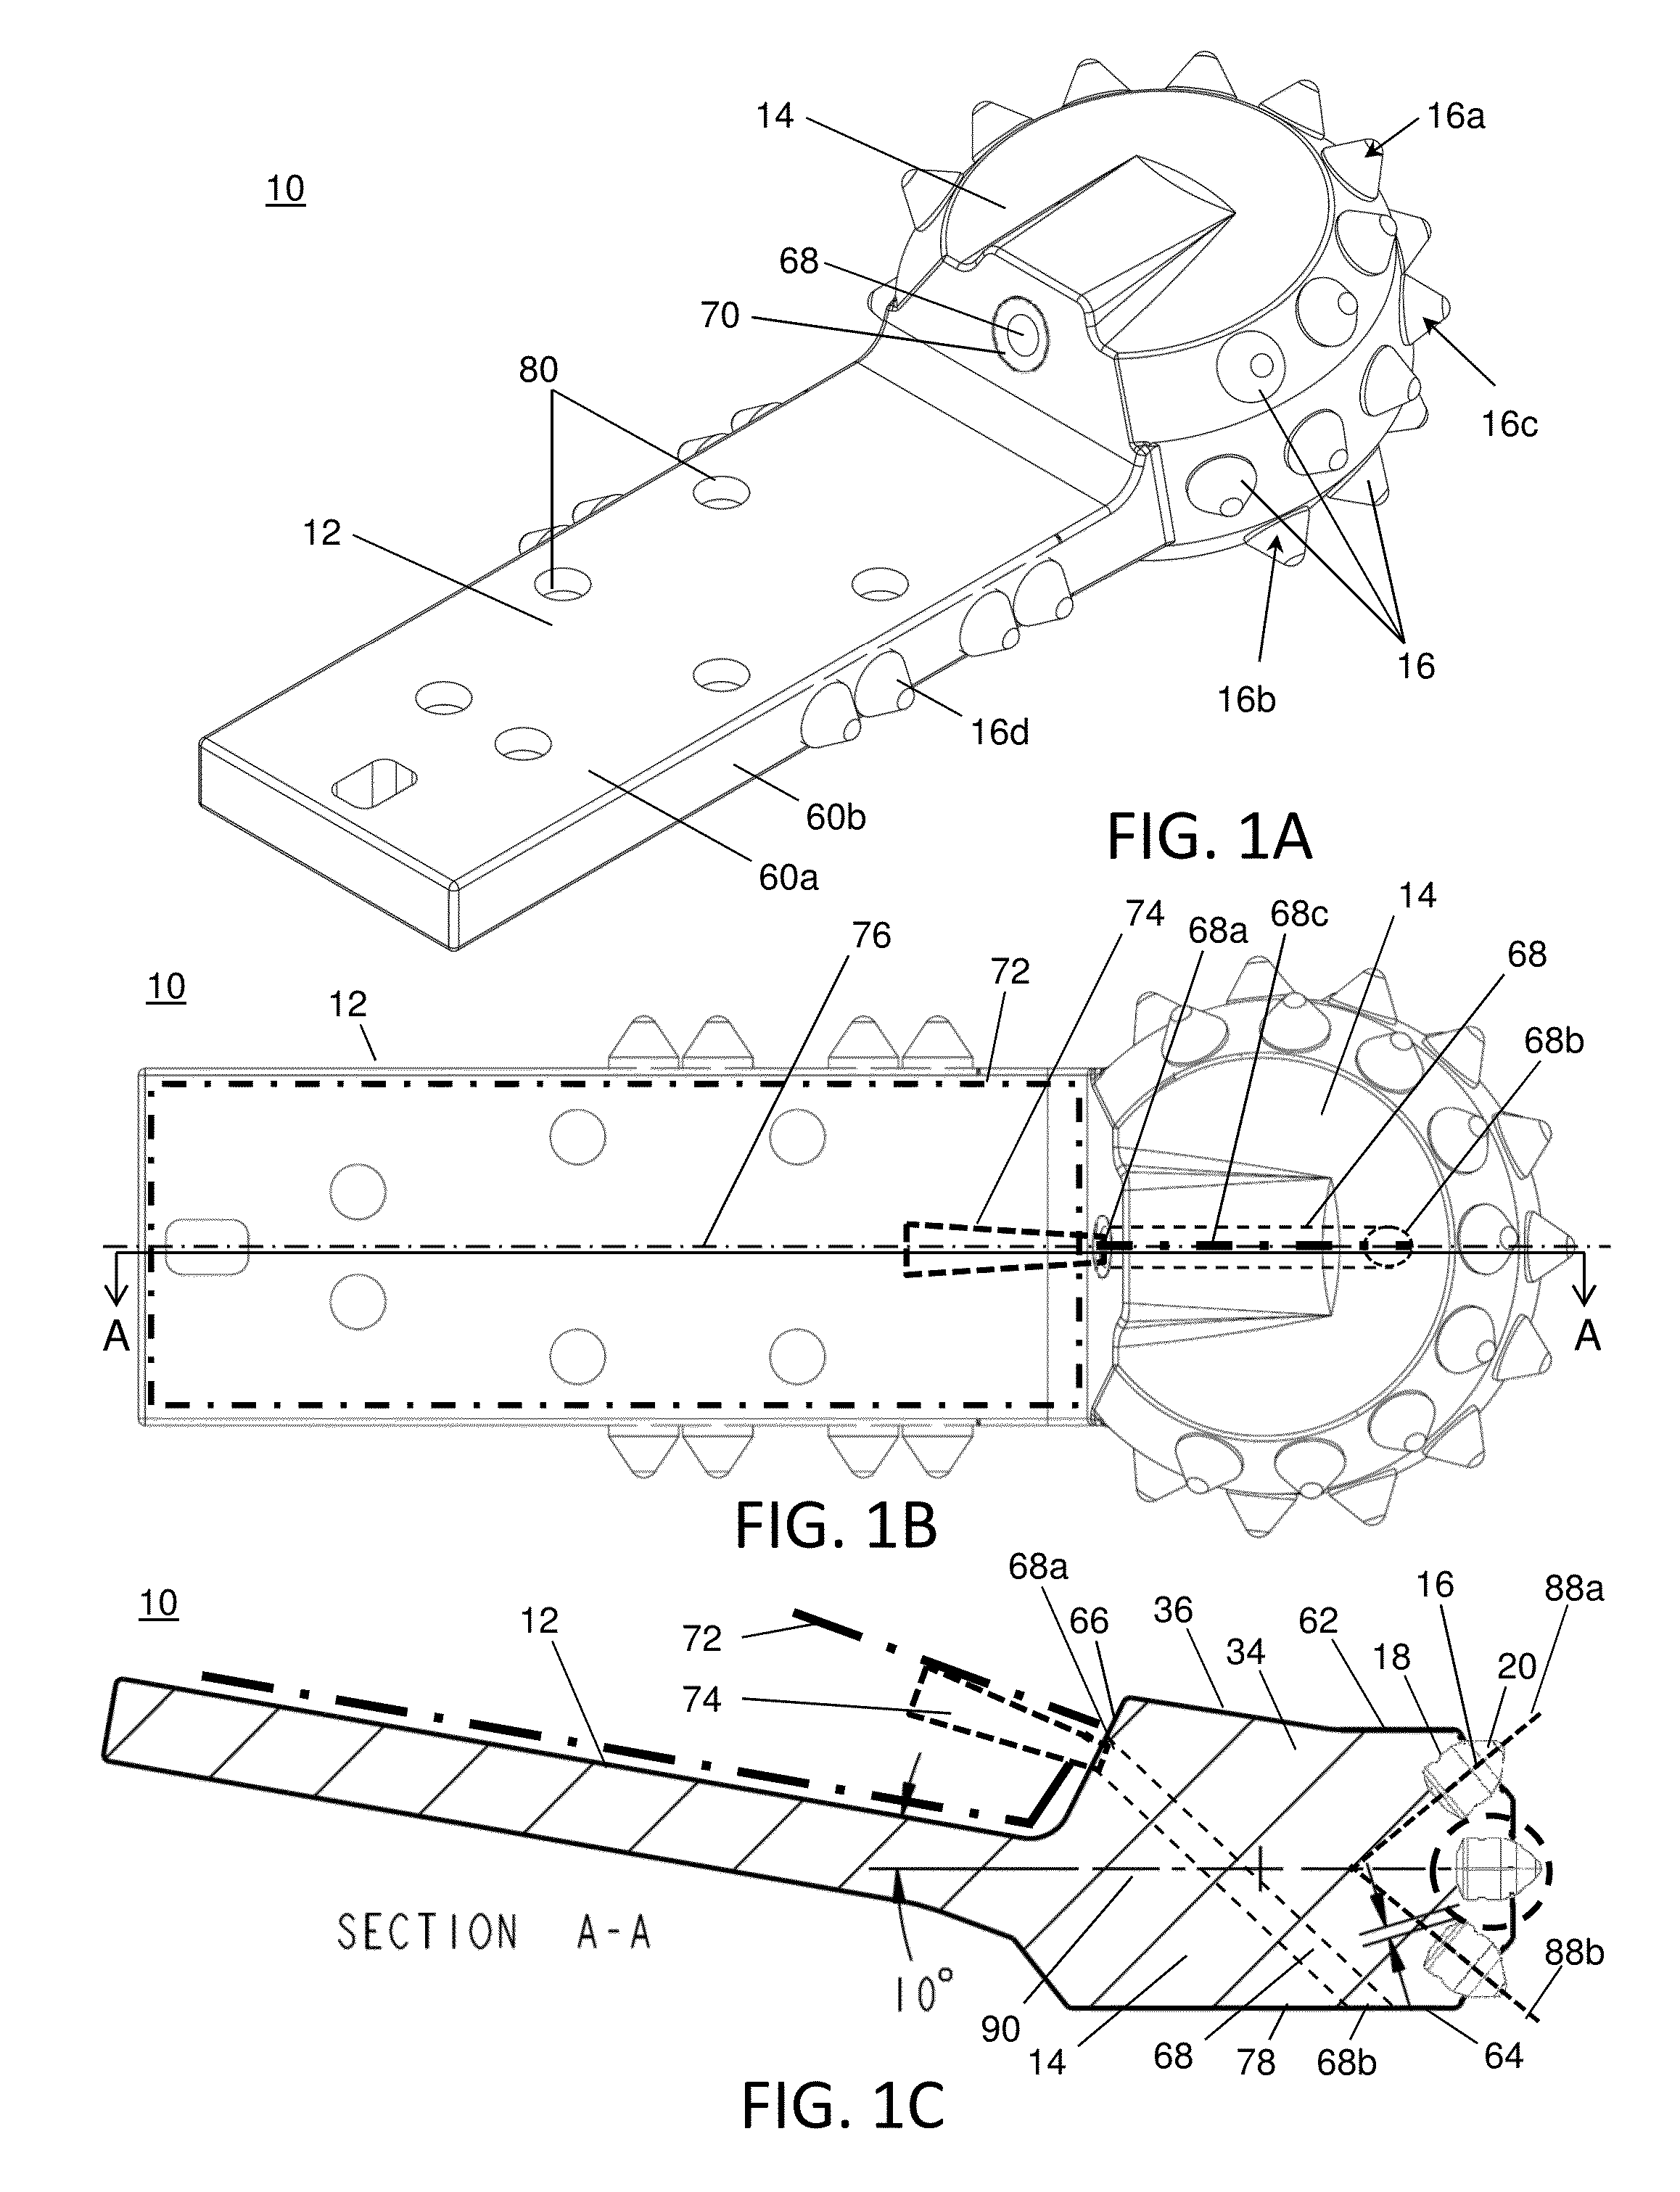 Boring bit and method of manufacture